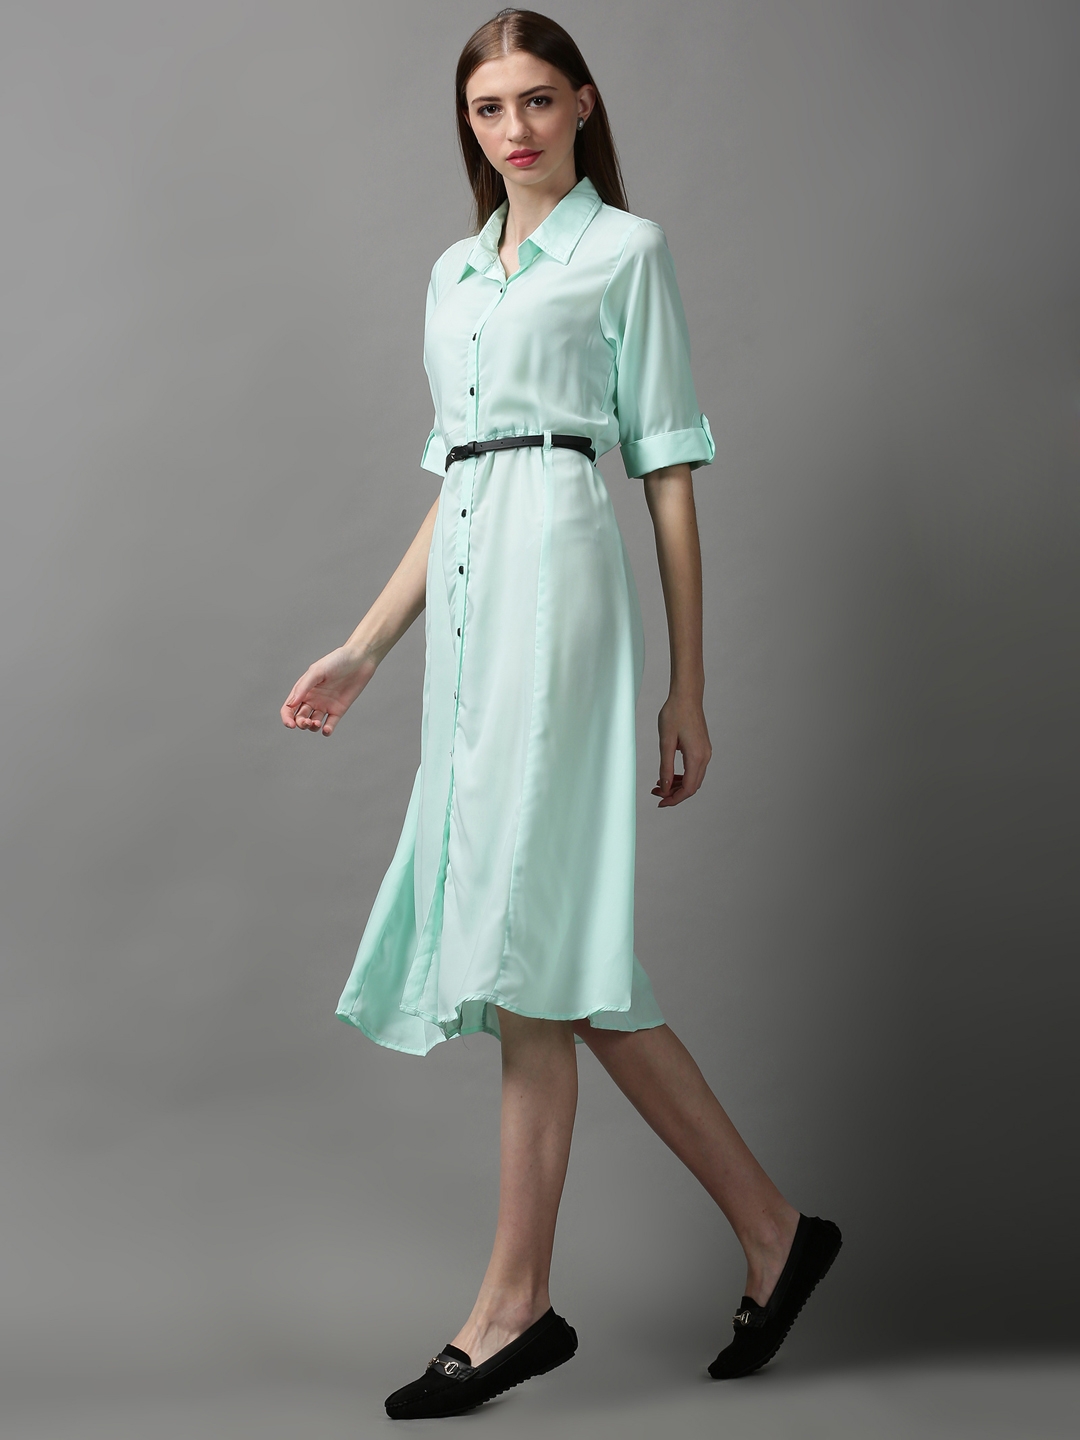 Women's Green Polyester Solid Dresses